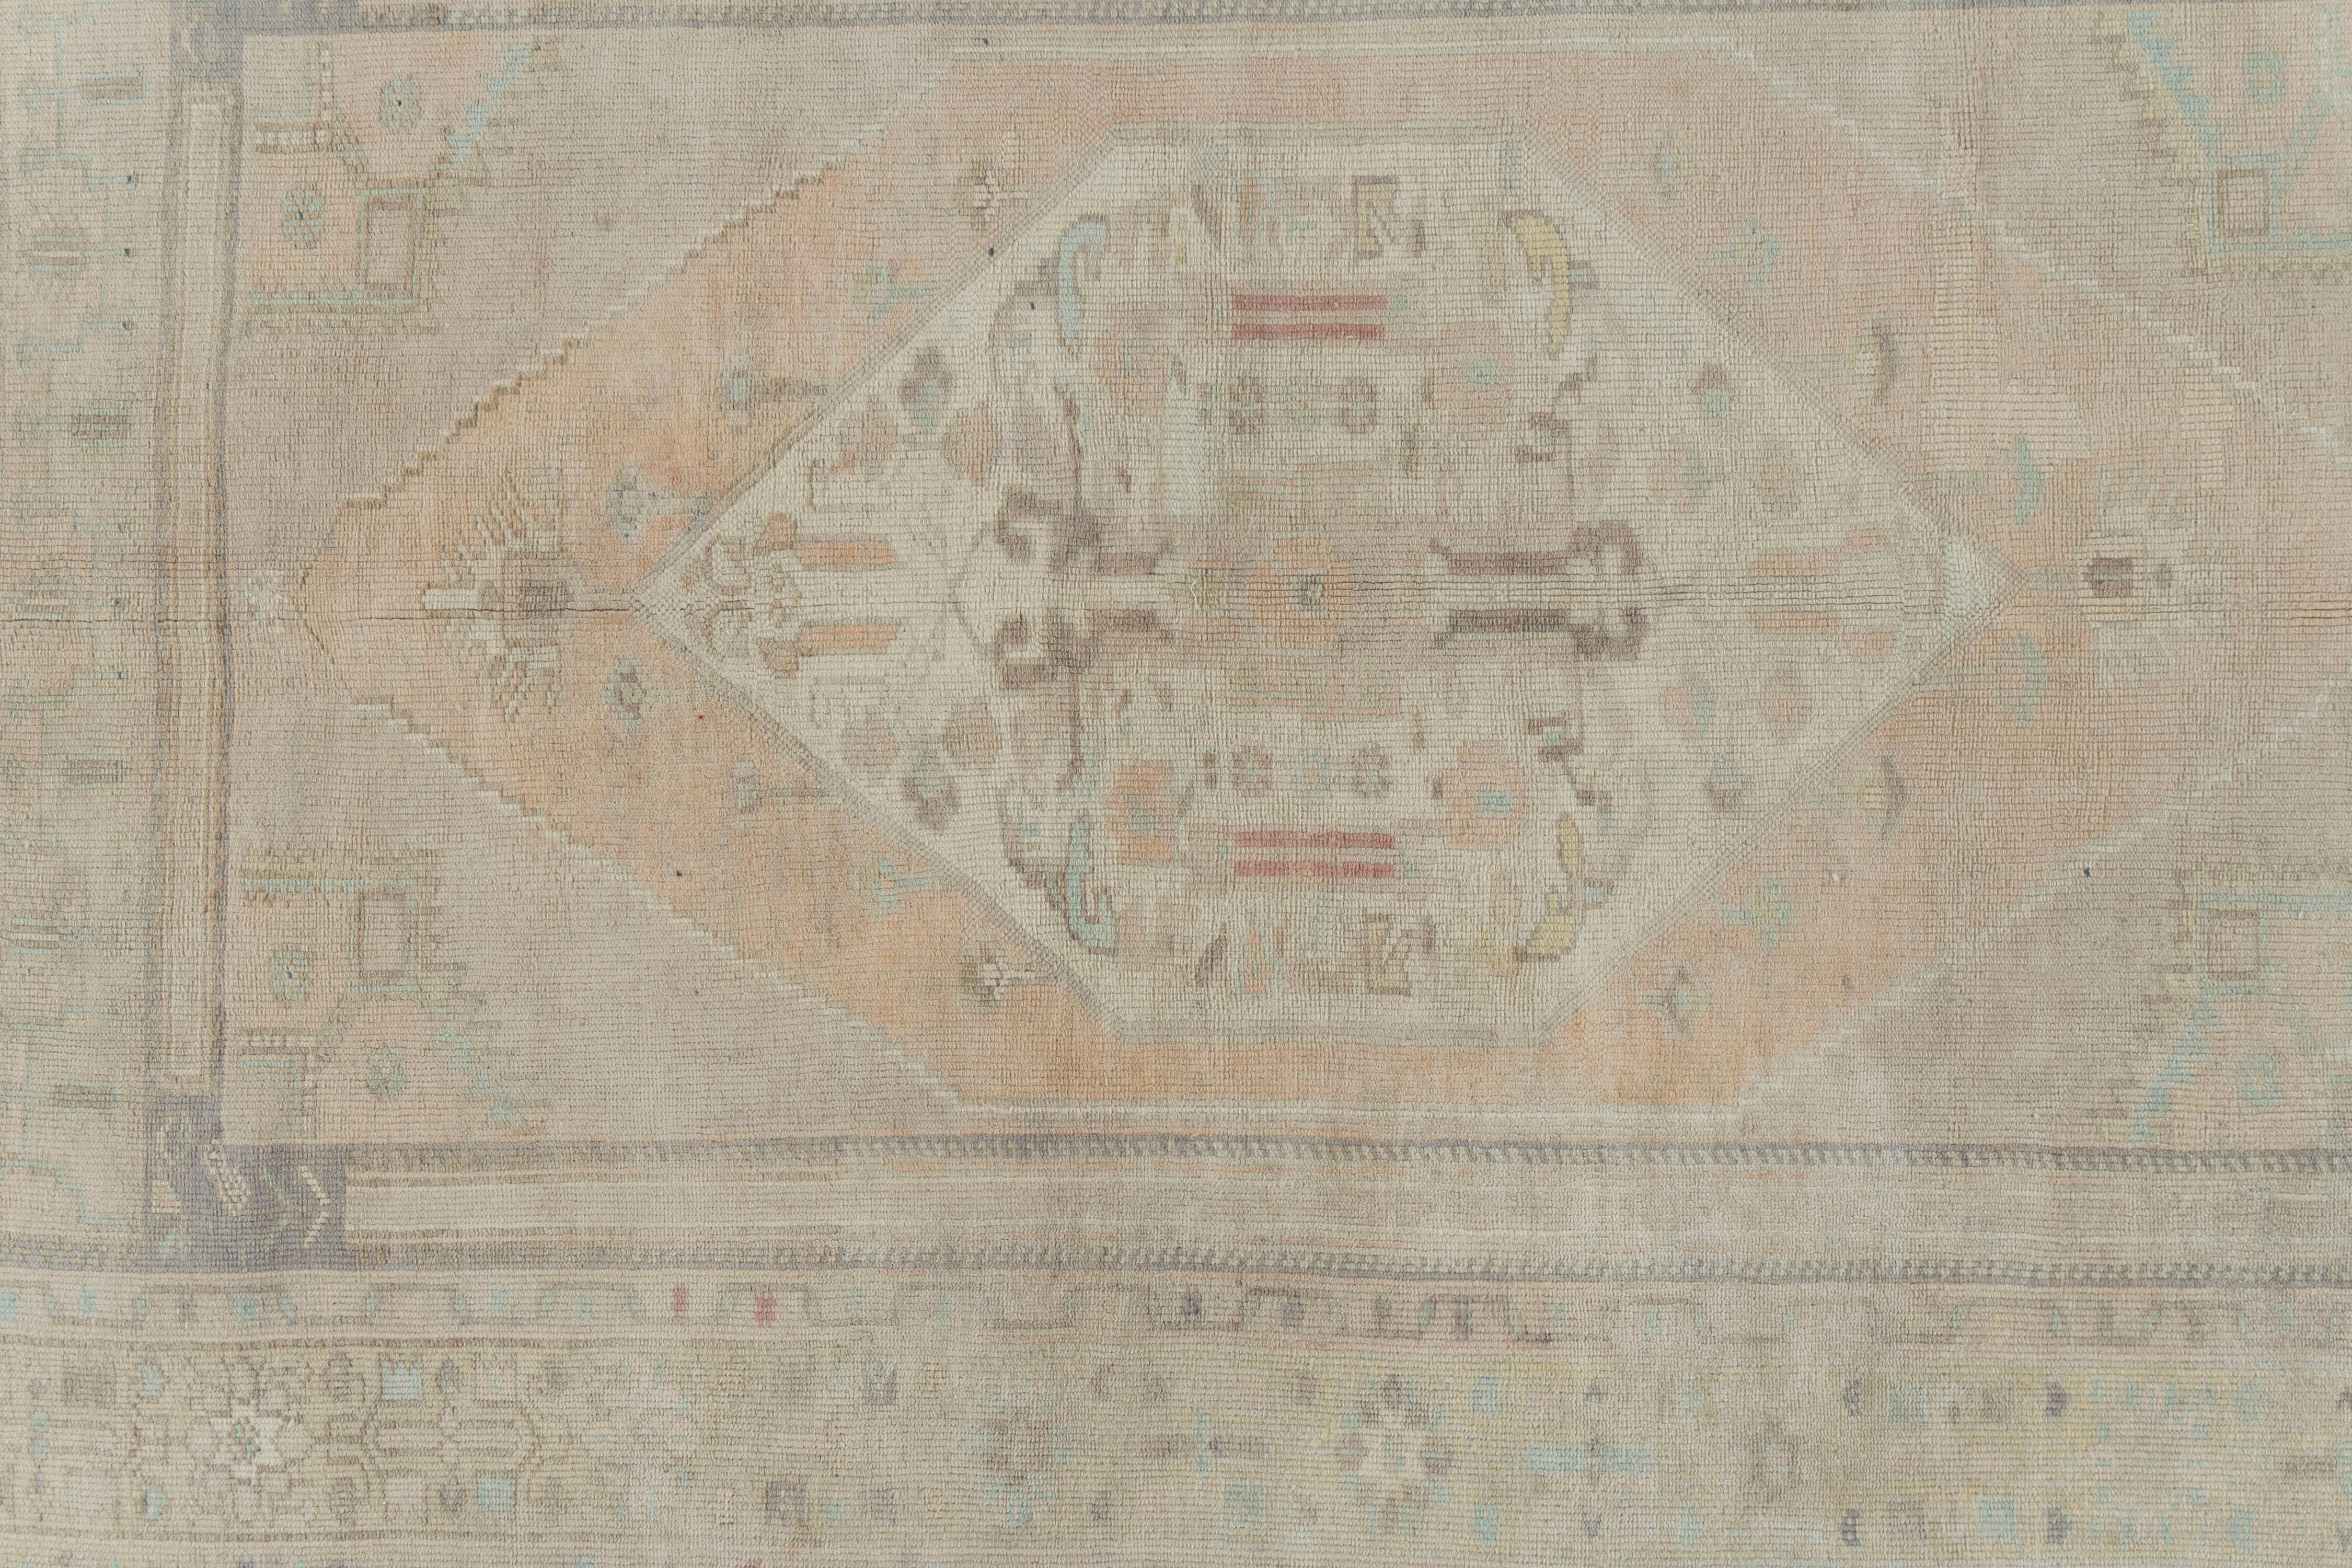 Vintage Turkish Oushak Area Rug 4'4 X 6'3. Oushak's are known for their soft palettes combined with eccentric drawing. Oushak in western Turkey has the longest continuous rug weaving history, stretching back at least to the mid-fifteenth century. It